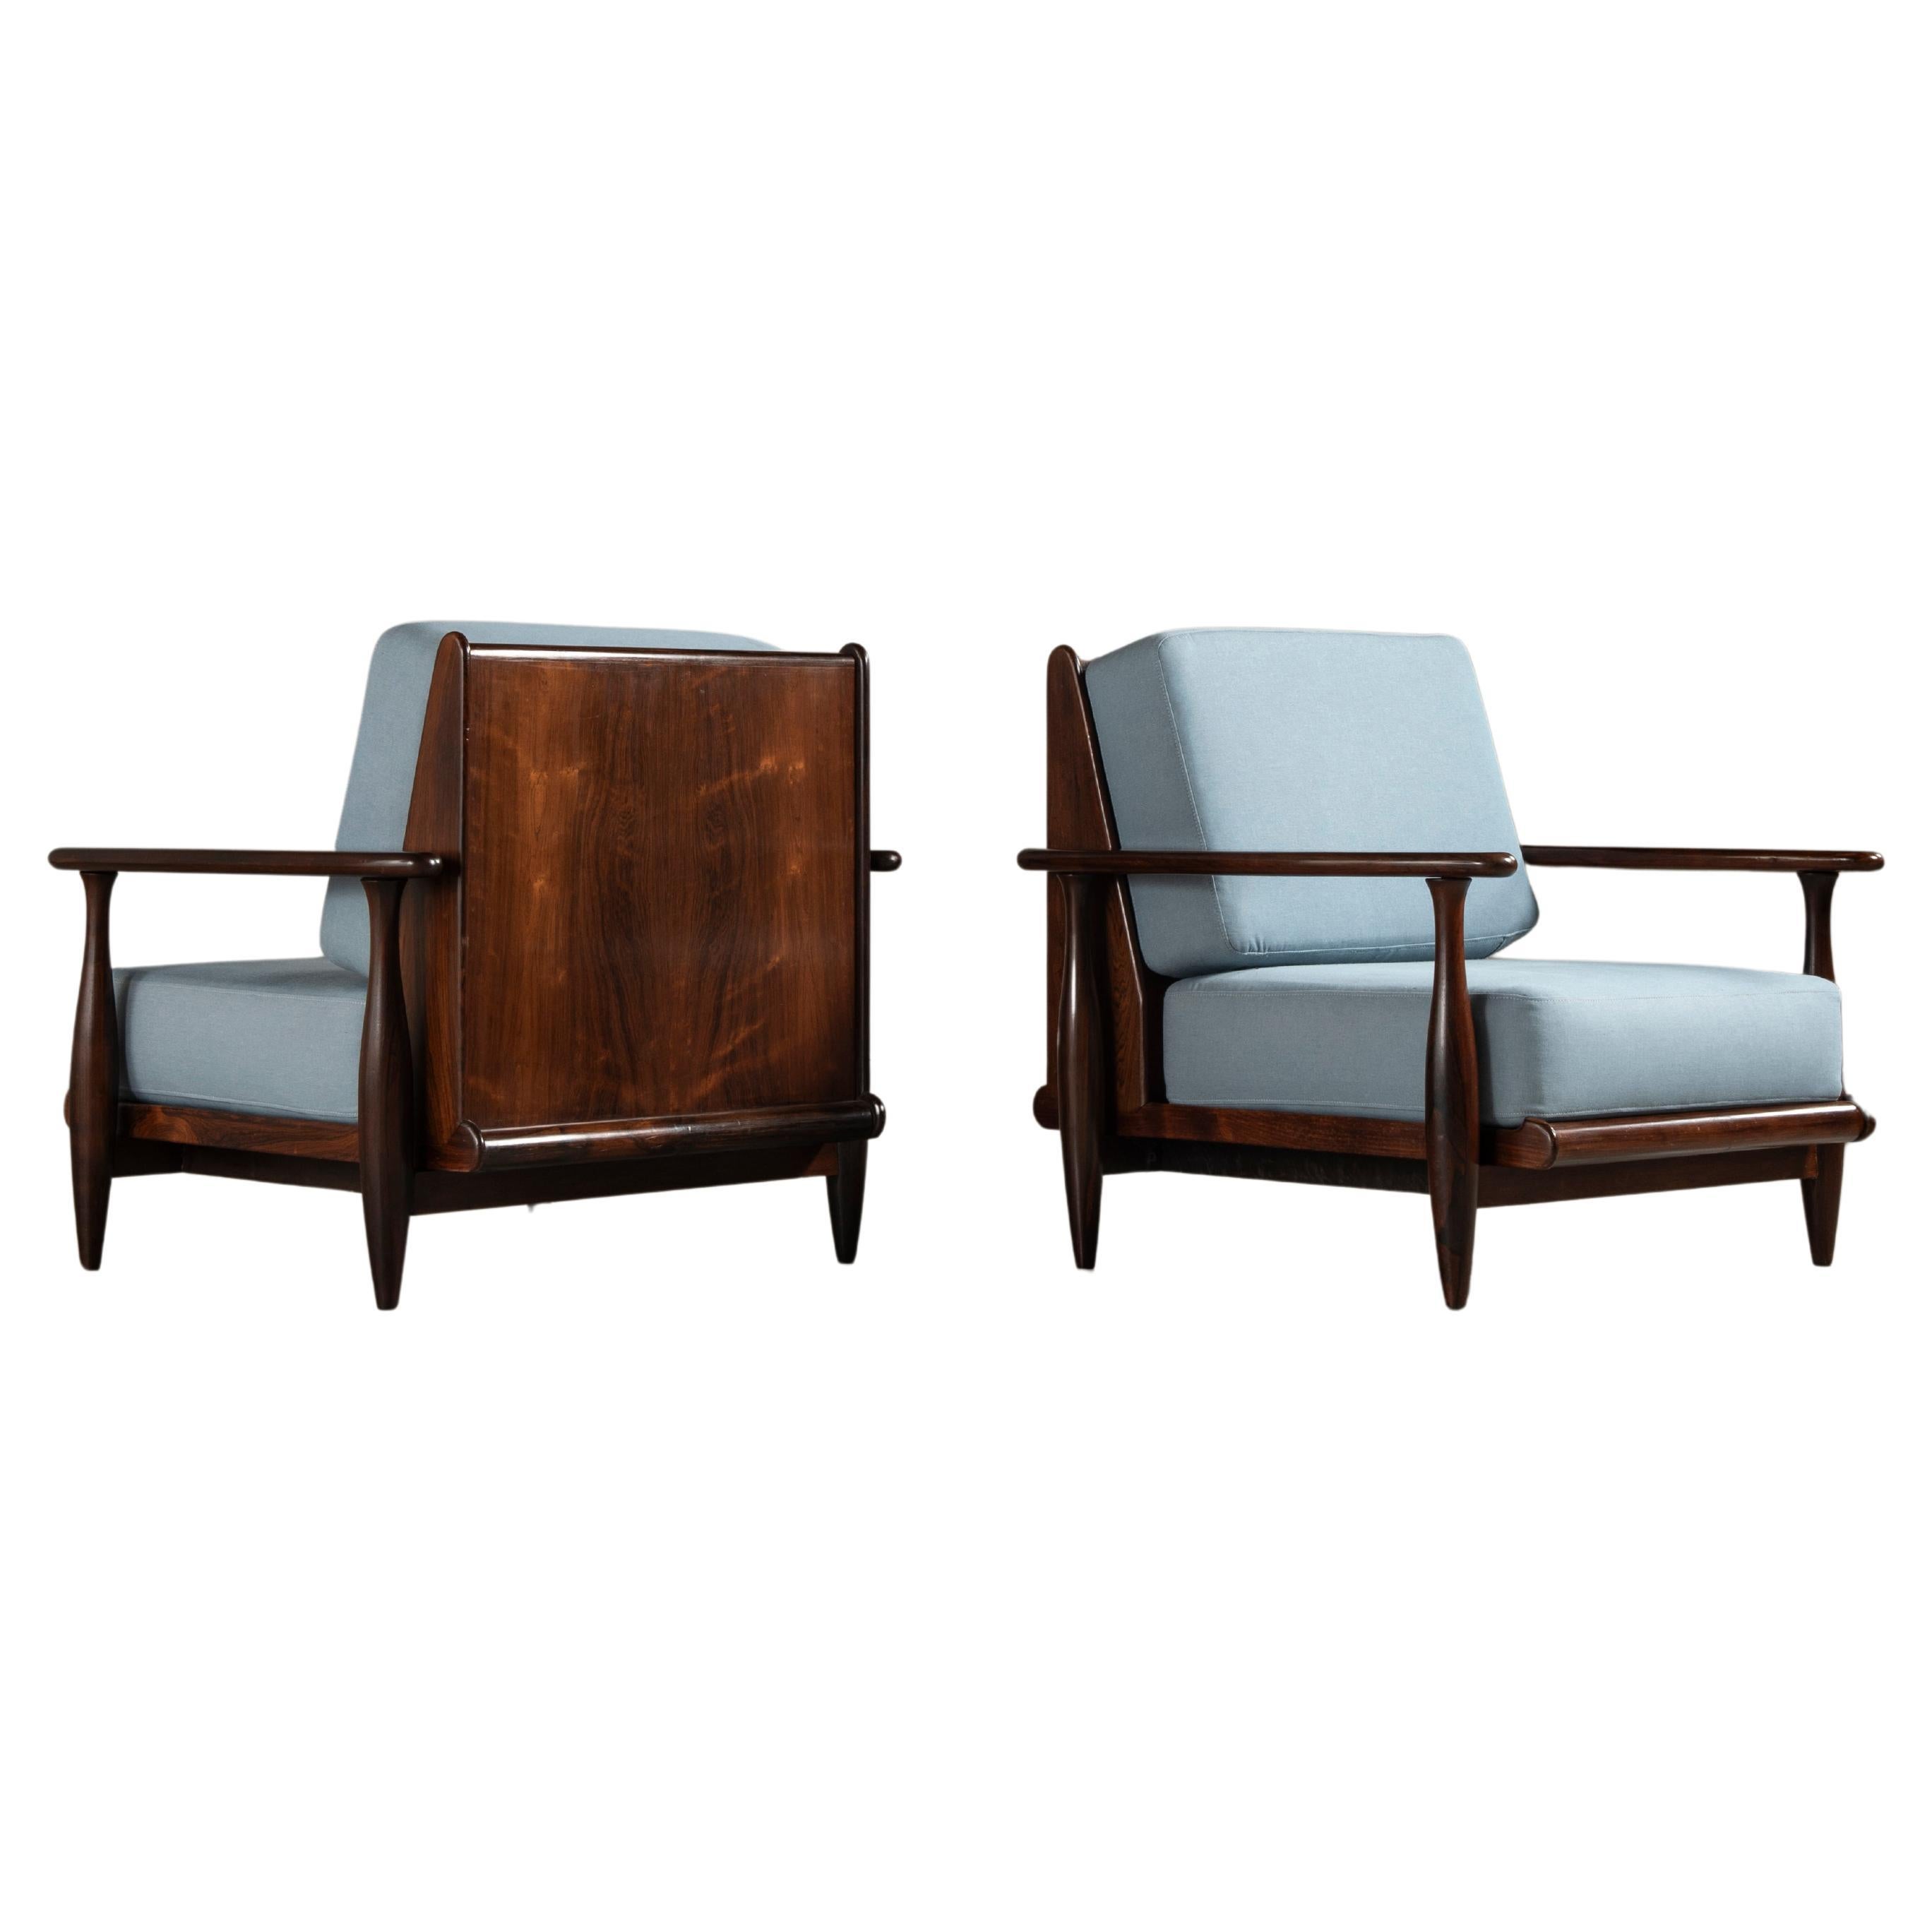 Pair of Lounge Chairs, by Liceu de Artes e Ofícios, Brazilian Mid-Century Modern For Sale